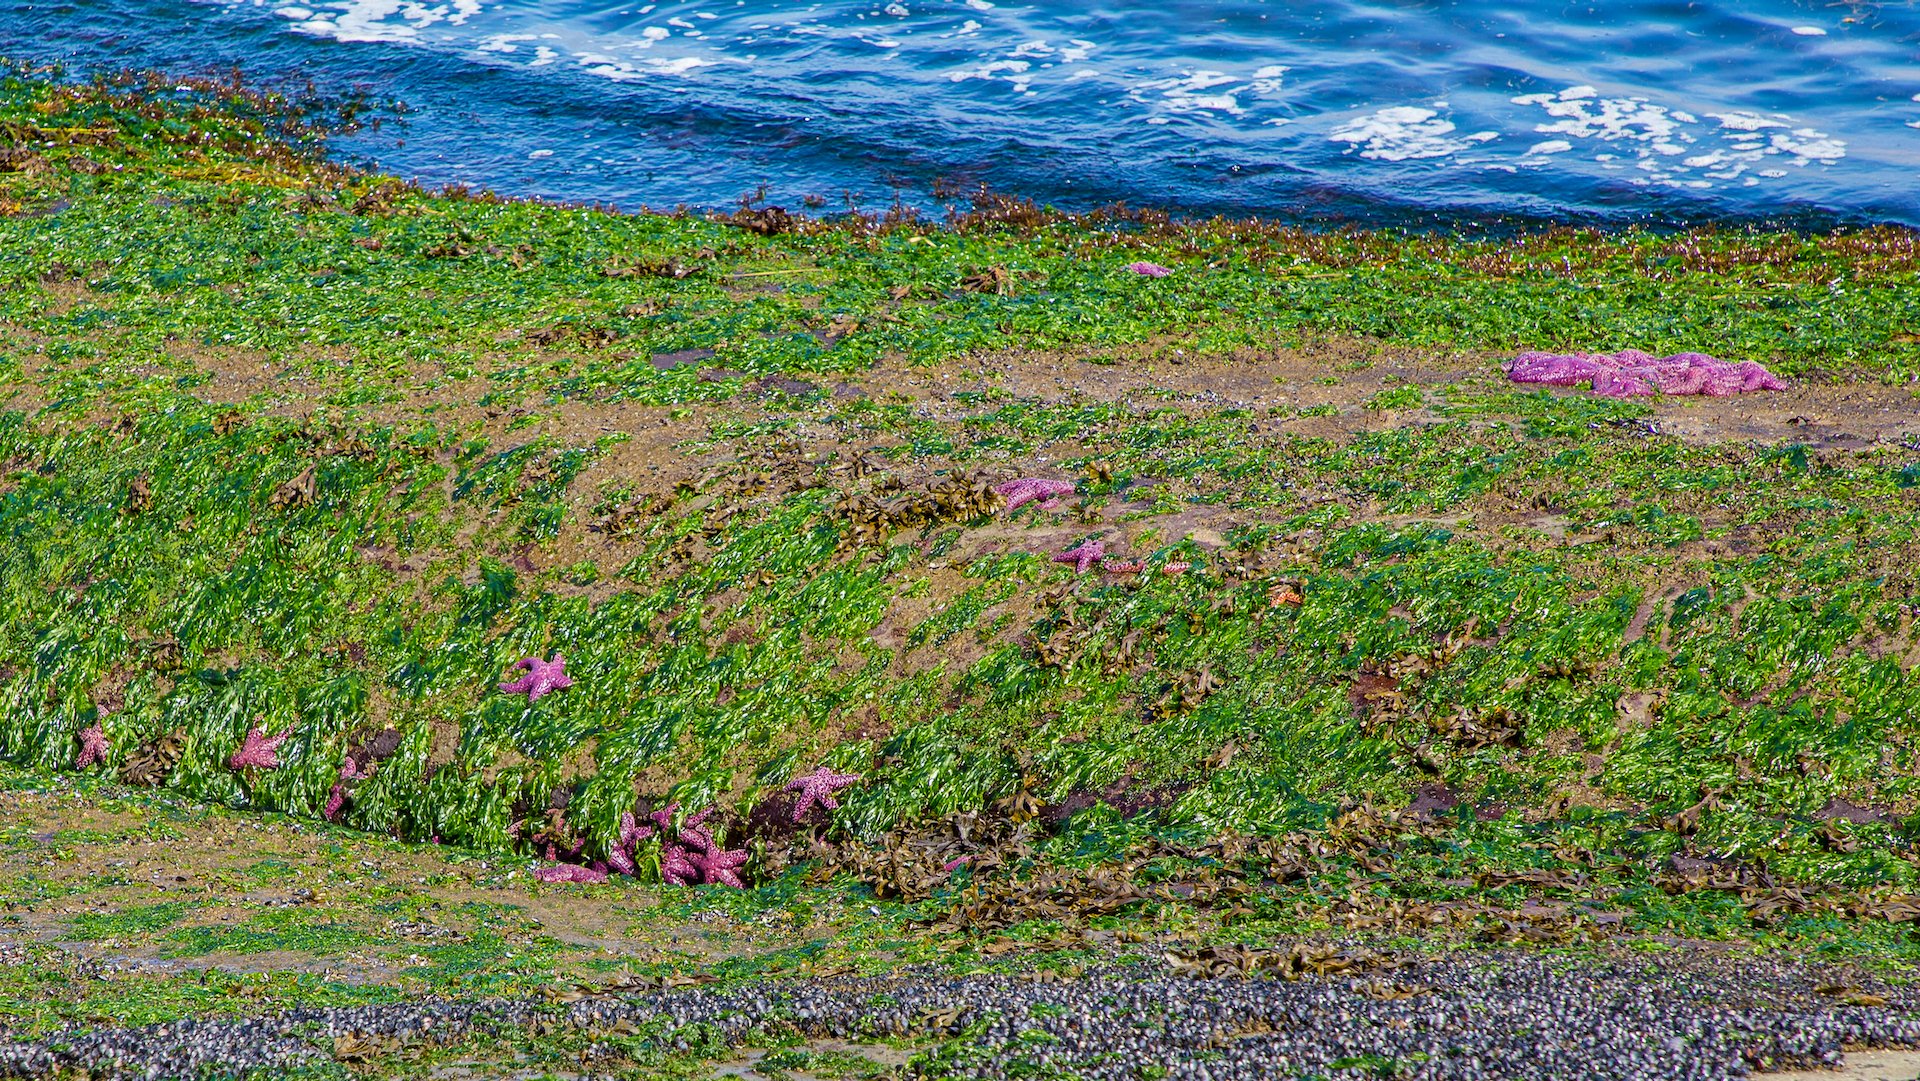  With the tide out, there were so many purple sea stars visible along the tide line. 